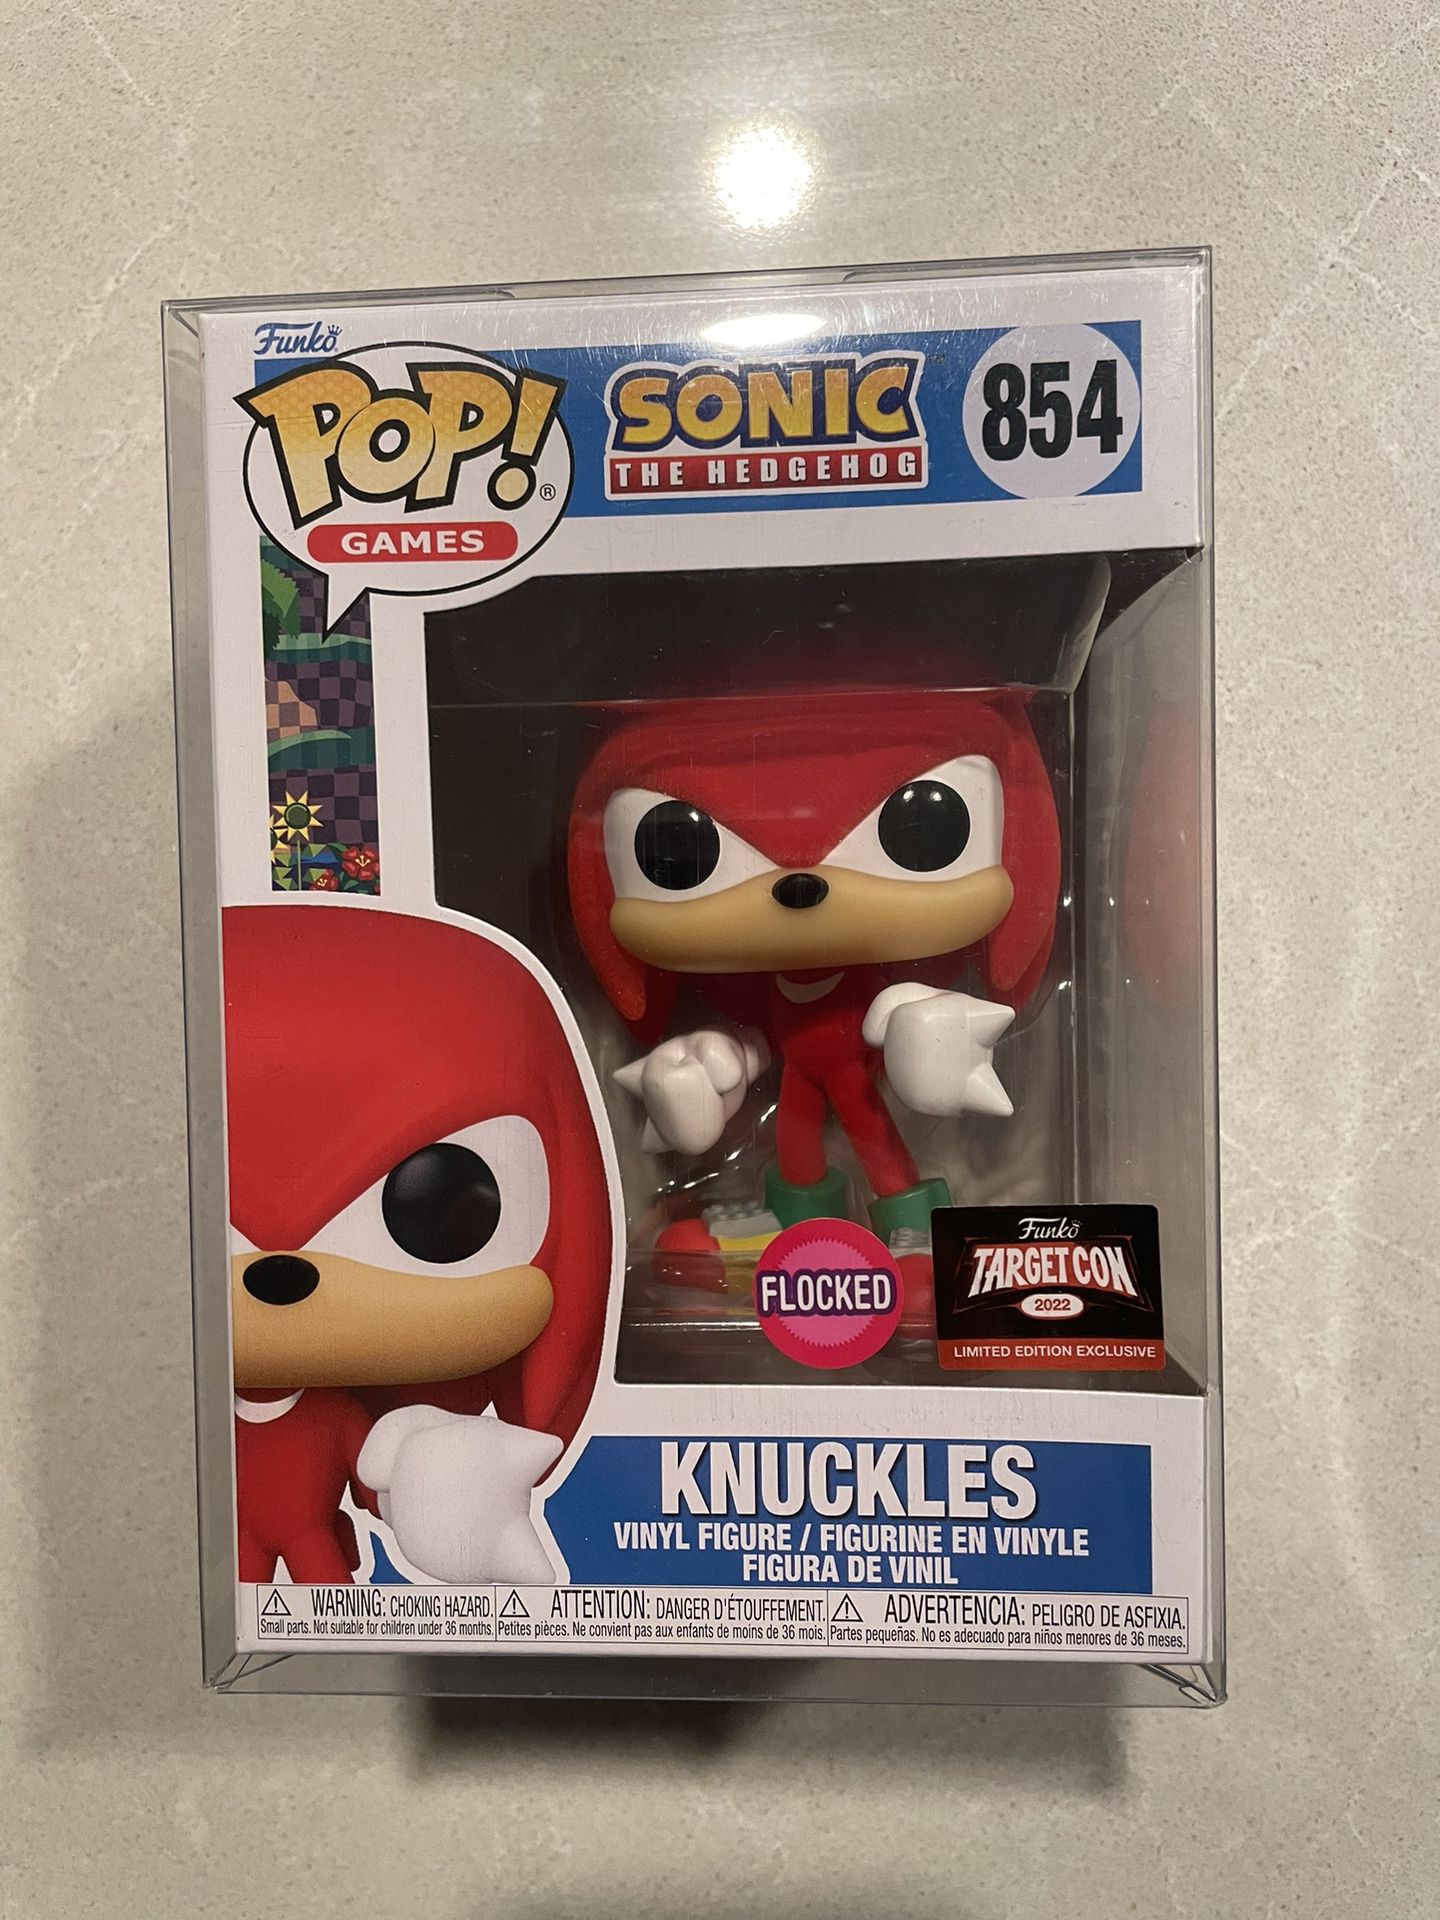 Flocked Knuckles Funko Pop *MINT* 2022 Target Exclusive Sonic The Hedgehog 854 with protector TargetCon Tails SEGA Nintendo Sony PlayStation